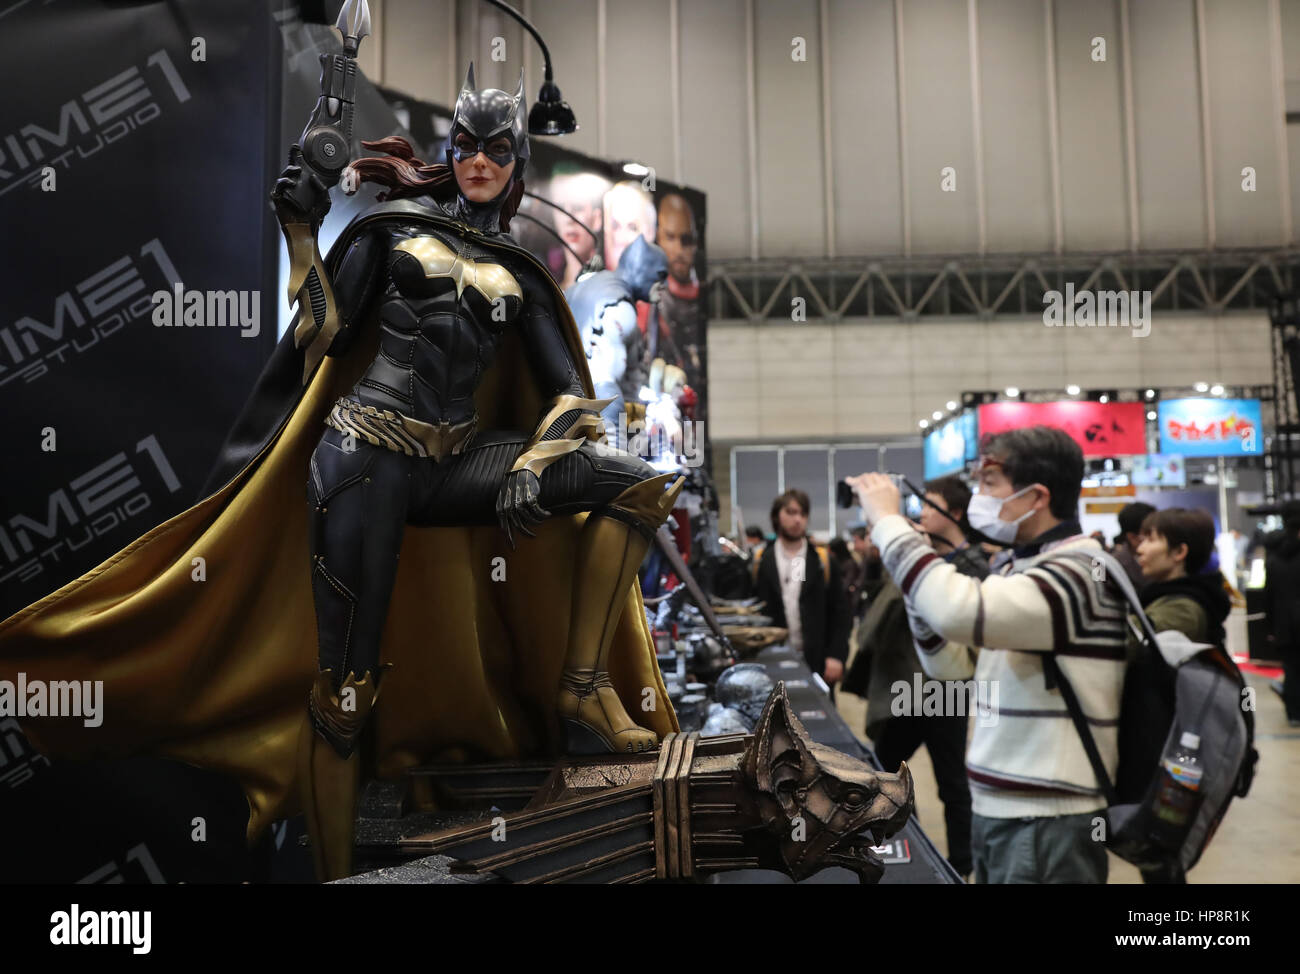 Chiba, Japan. 19th Feb, 2017. Japan's toy maker Prime1Studio displays figure of Batwoman at the Wonder Festival 2017 Winter in Chiba, suburban Tokyo on Sunday, February 19, 2017. Tens of thousands people visited one-day garage kits and plastic -models trade show hosted by Osaka based toy maker Kaiyodo. Credit: Yoshio Tsunoda/AFLO/Alamy Live News Stock Photo